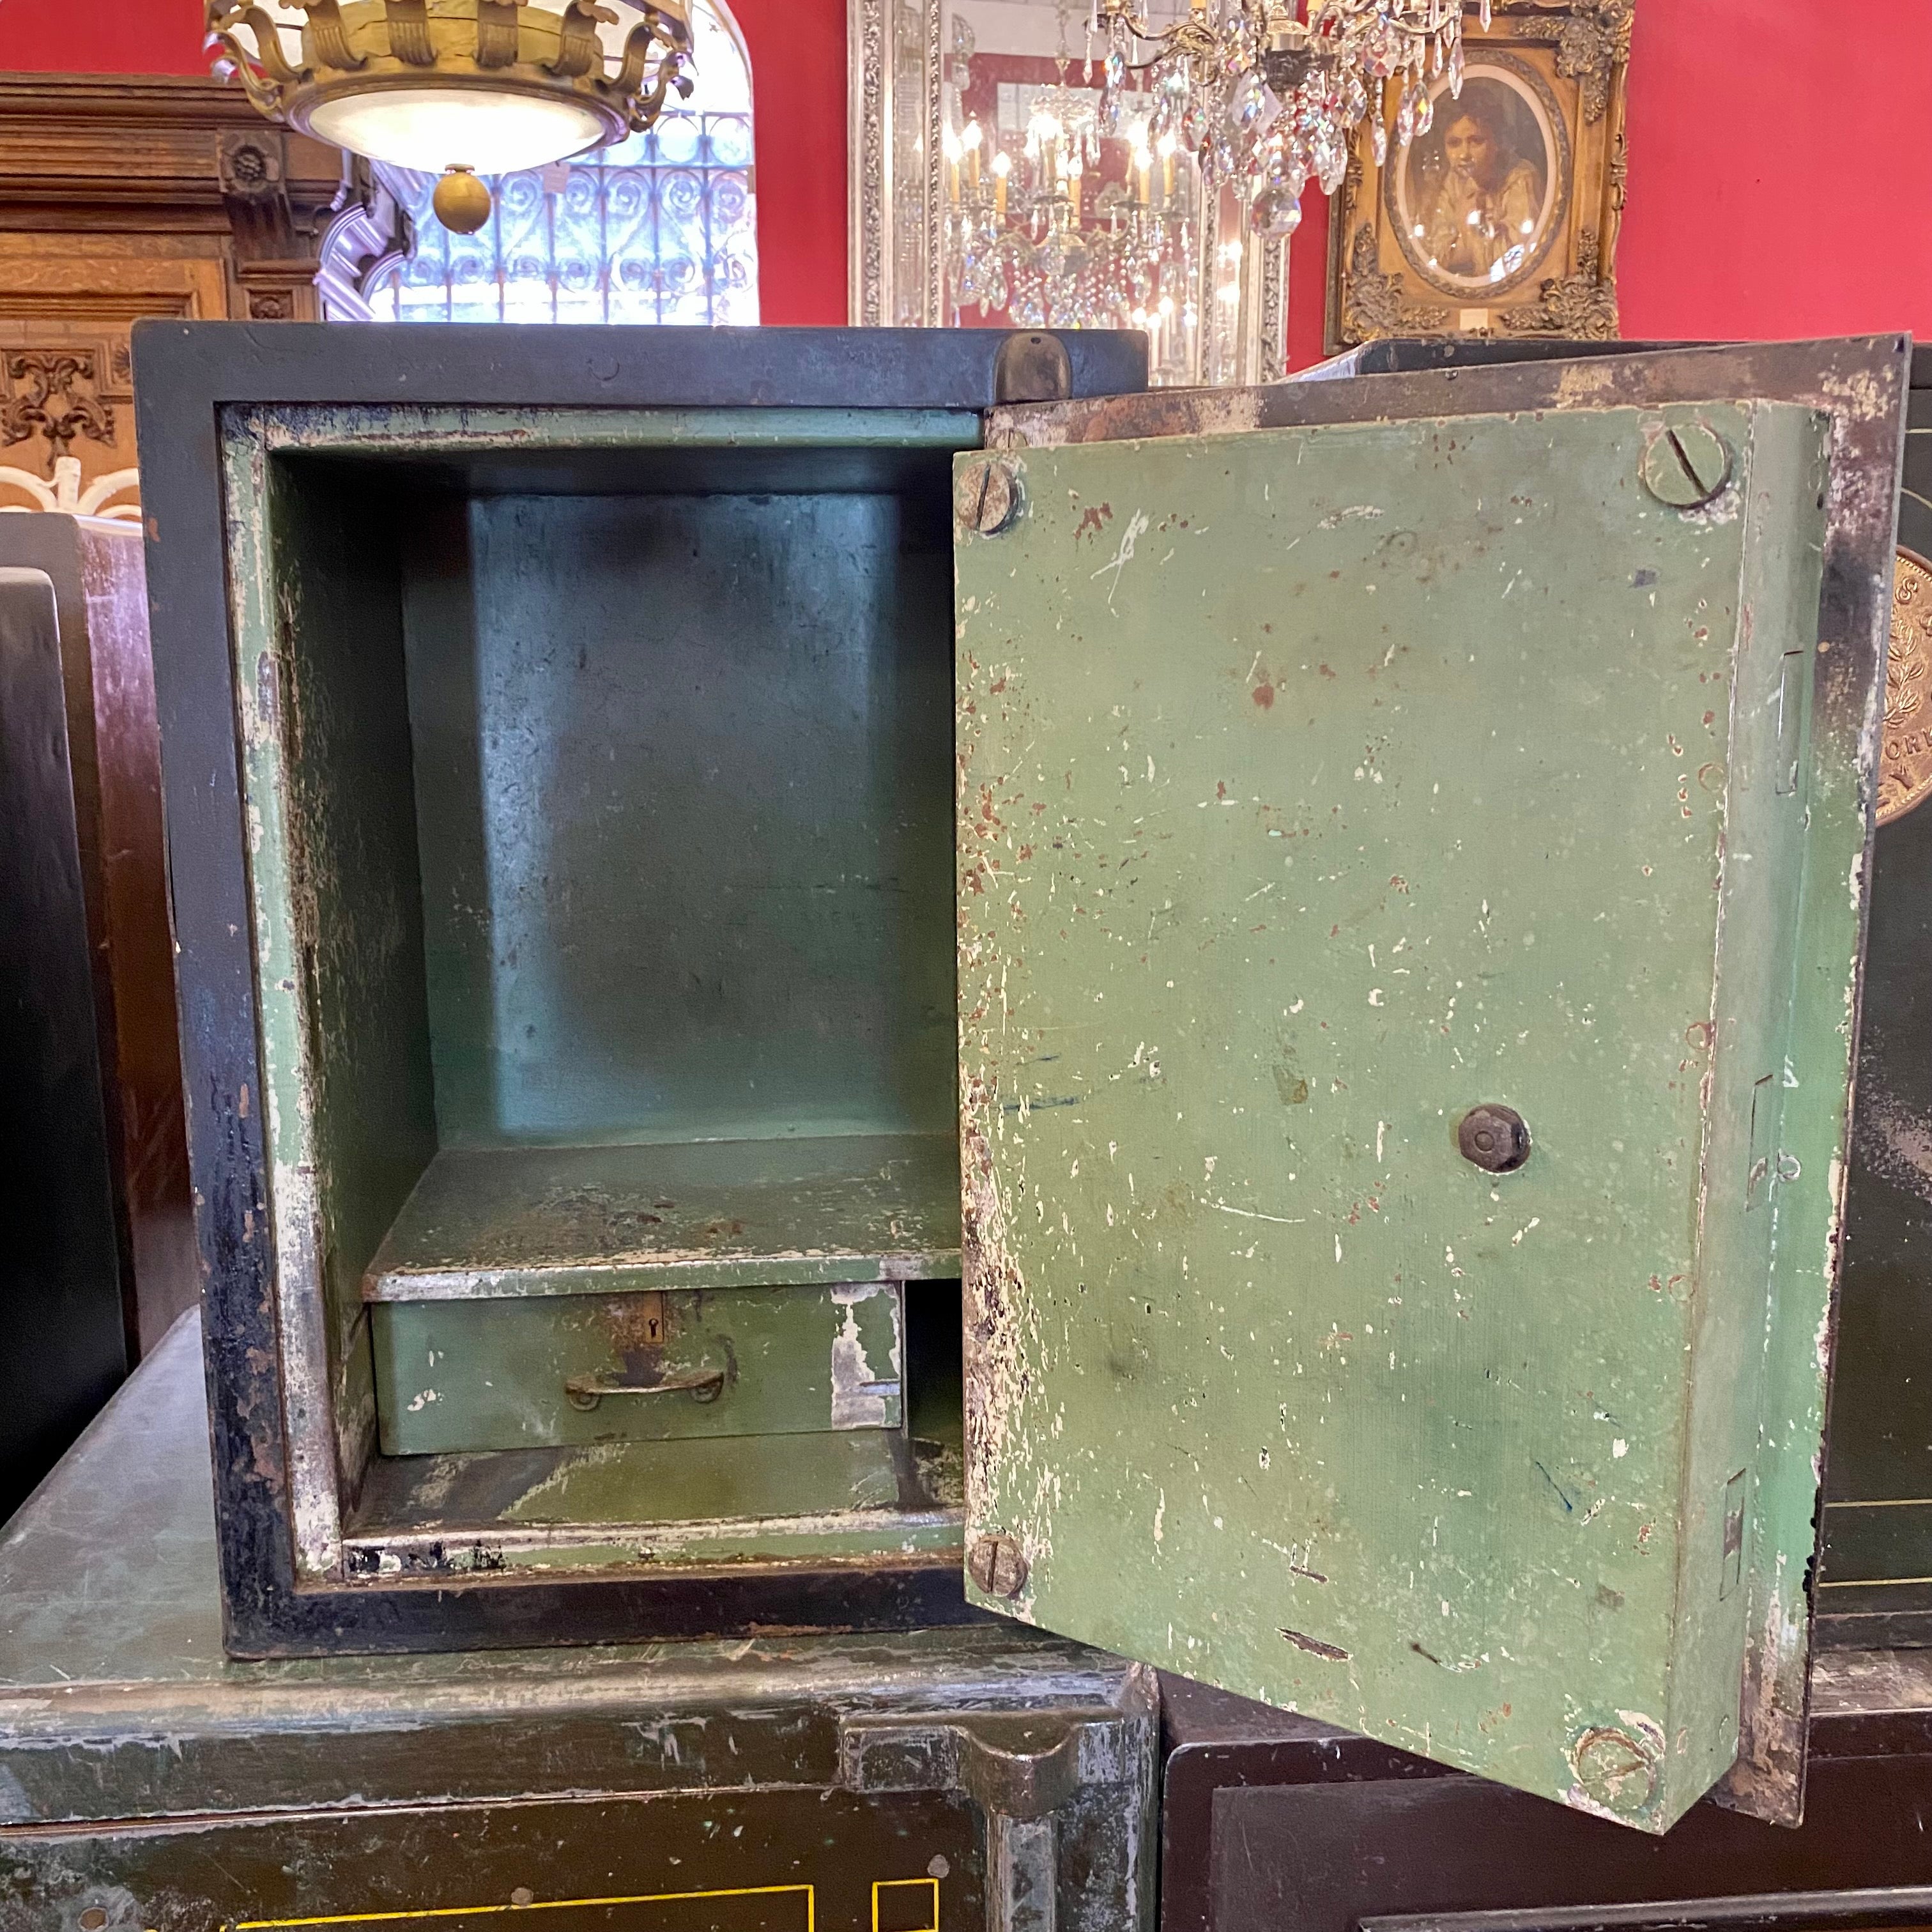 Antique Thomas Perry & Sons Safe